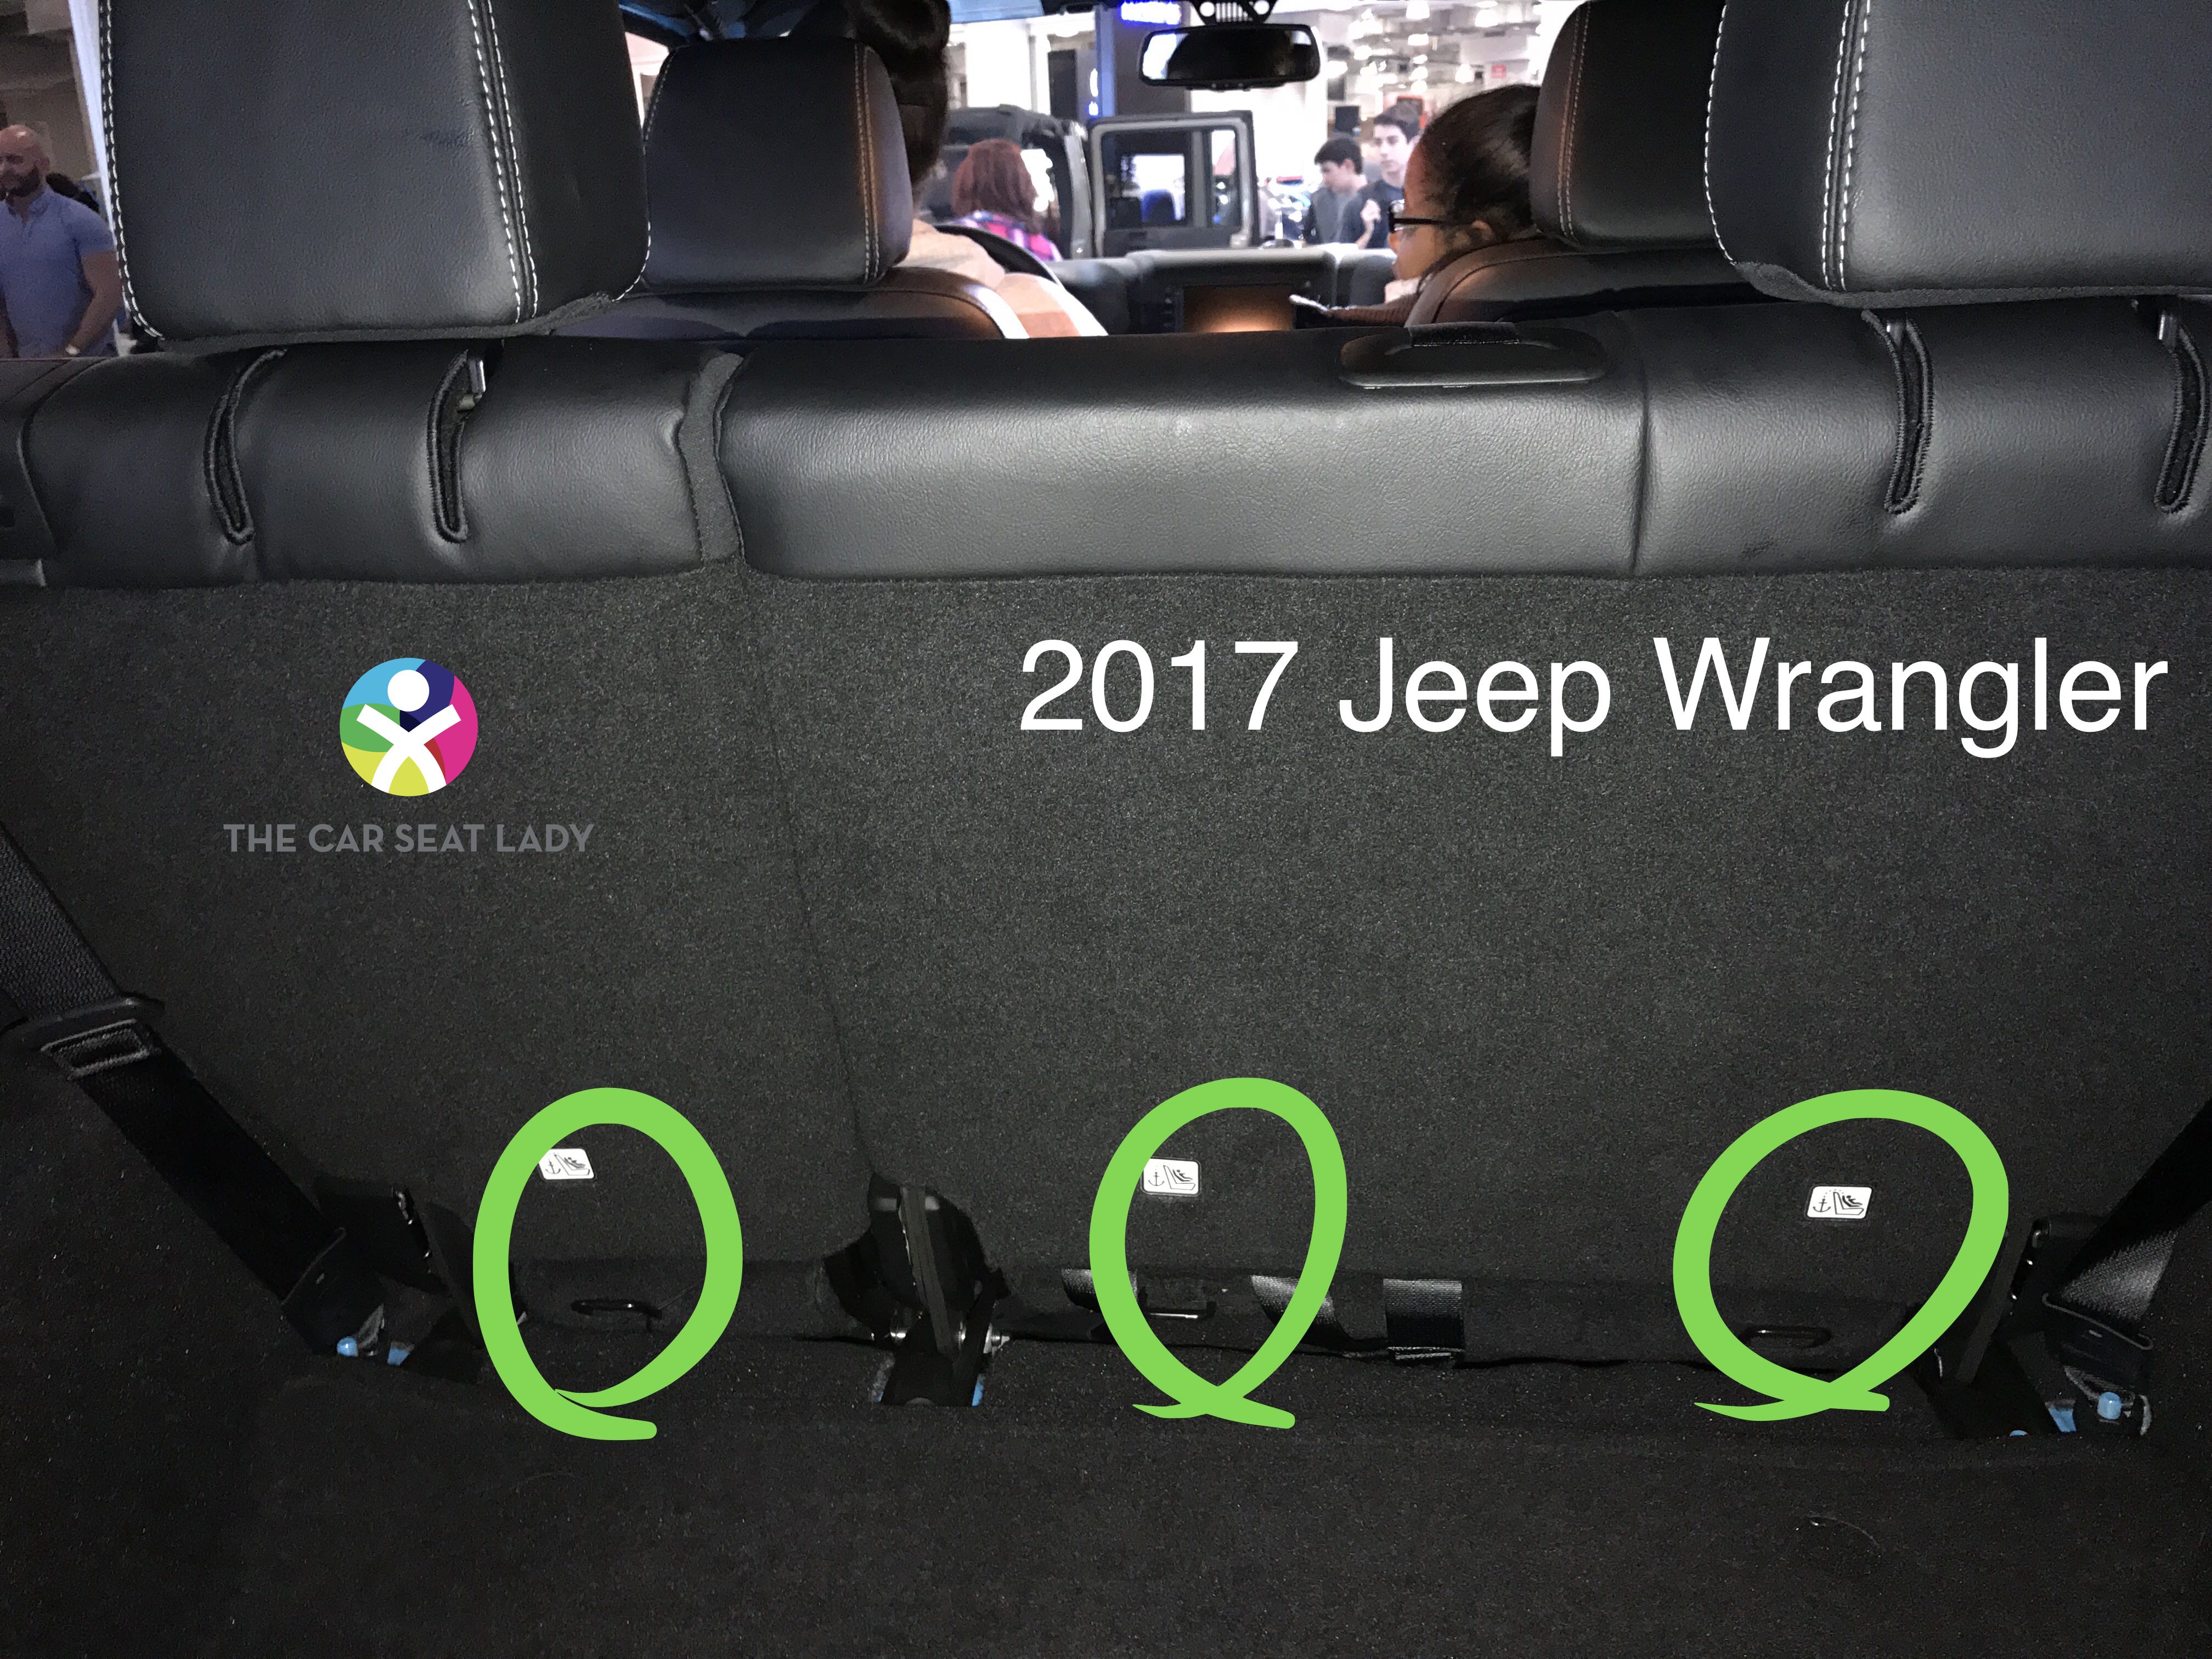 Installing A Child Seat In A Jeep Wrangler 